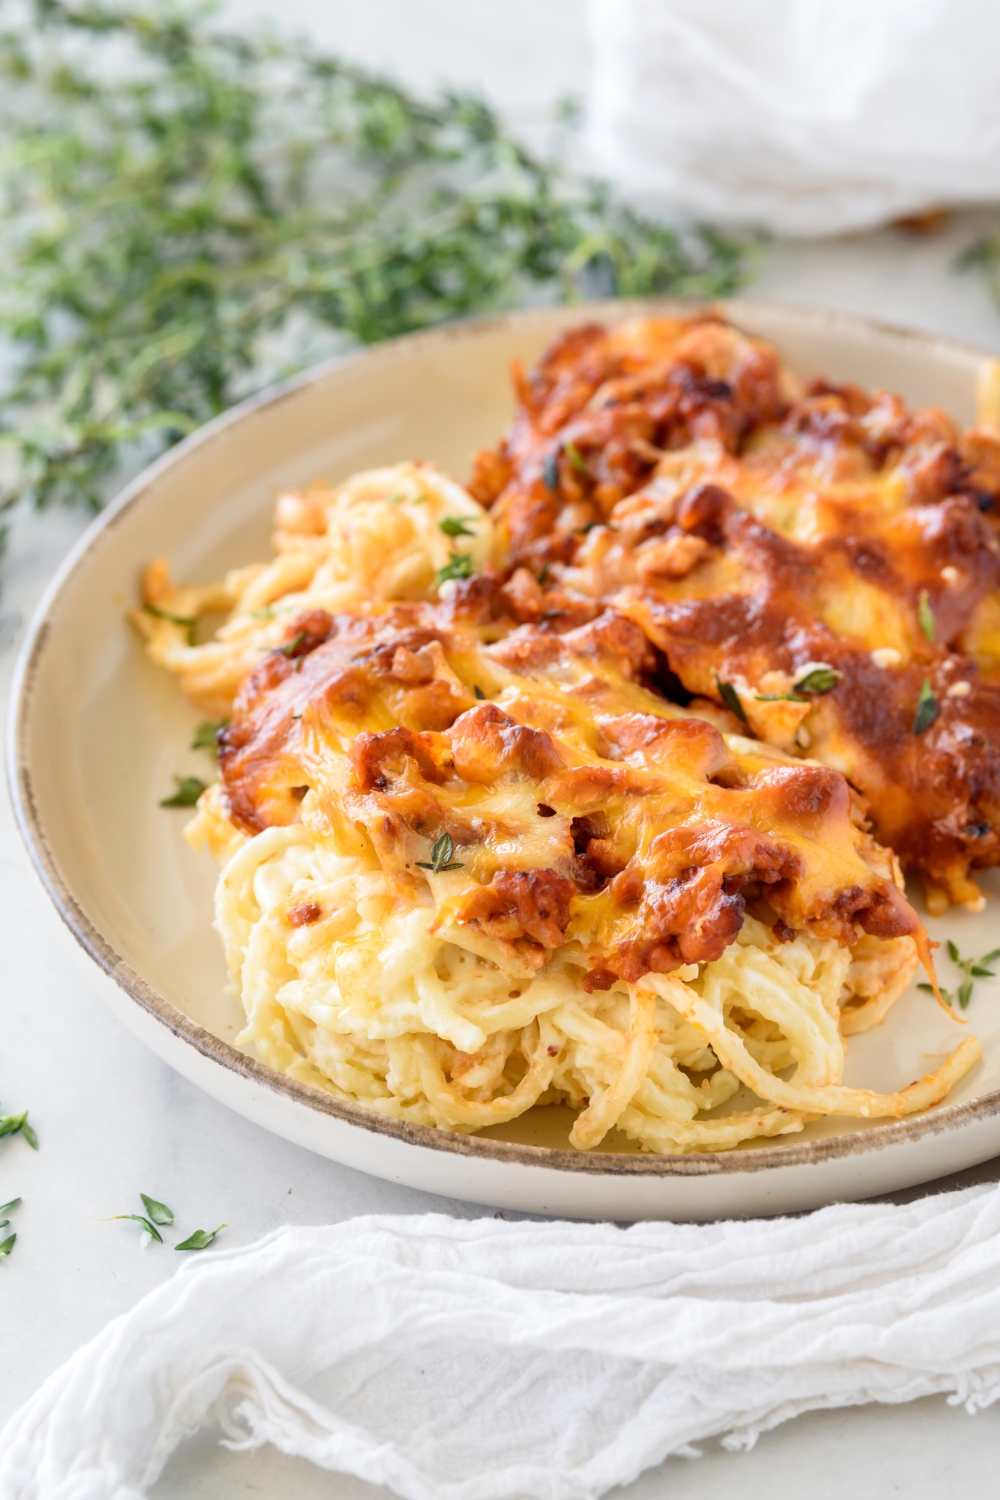 A bowl of baked spaghetti in white sauce covered in melted cheese with chunks of sausage.